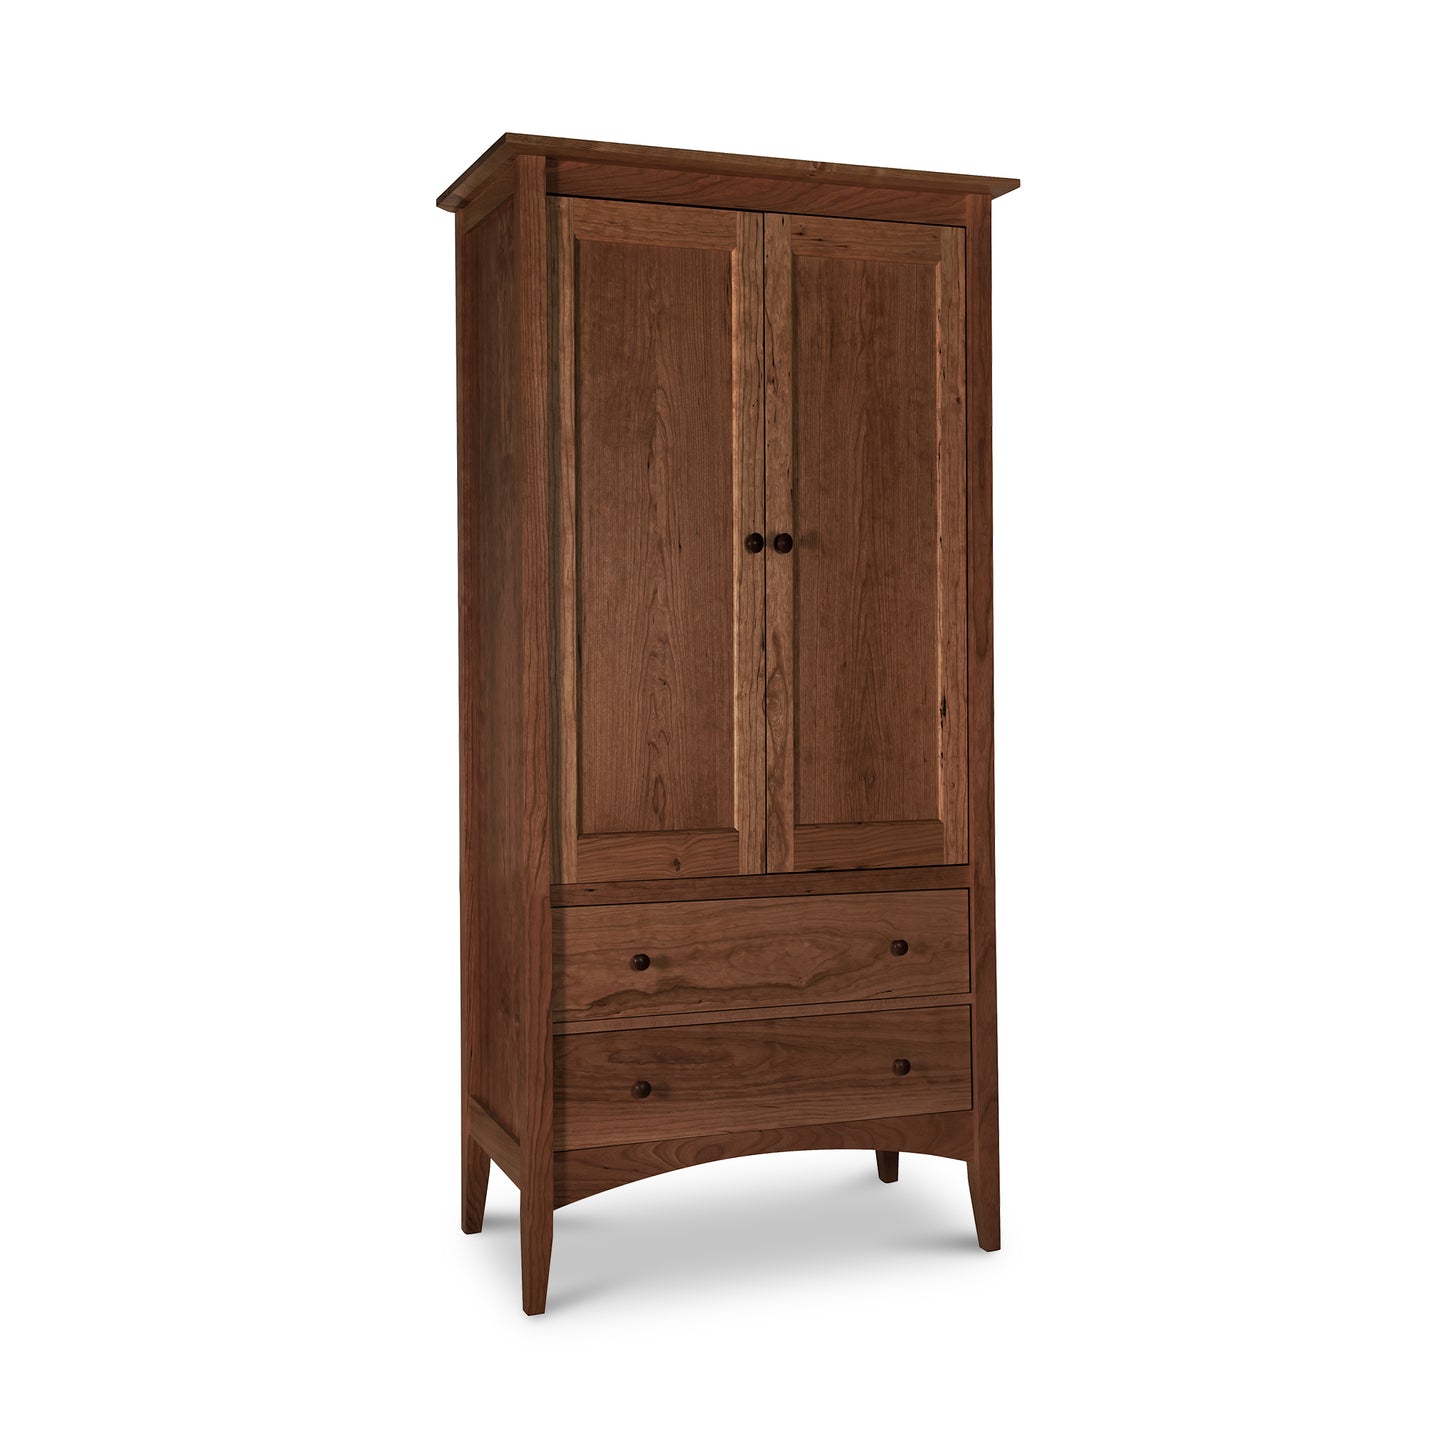 Heirloom quality, solid wood Maple Corner Woodworks American Shaker Armoire with two doors above and two drawers below, isolated on a white background.